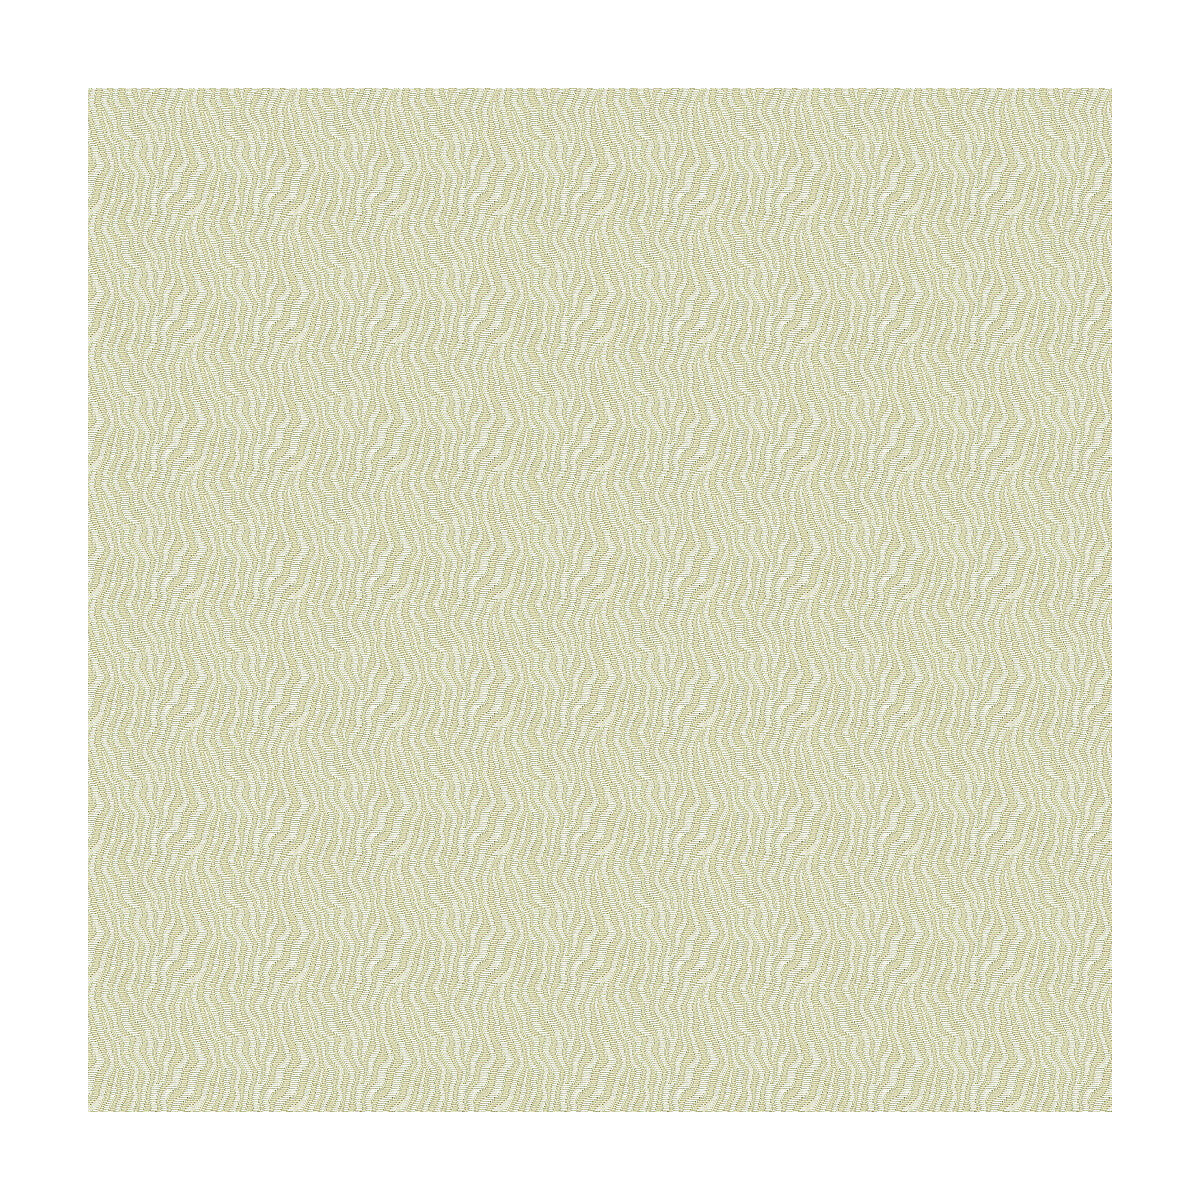 Kf Smt Jentry fabric in pearl color - pattern 27968.111.0 - by Kravet Smart in the Candice Olson collection